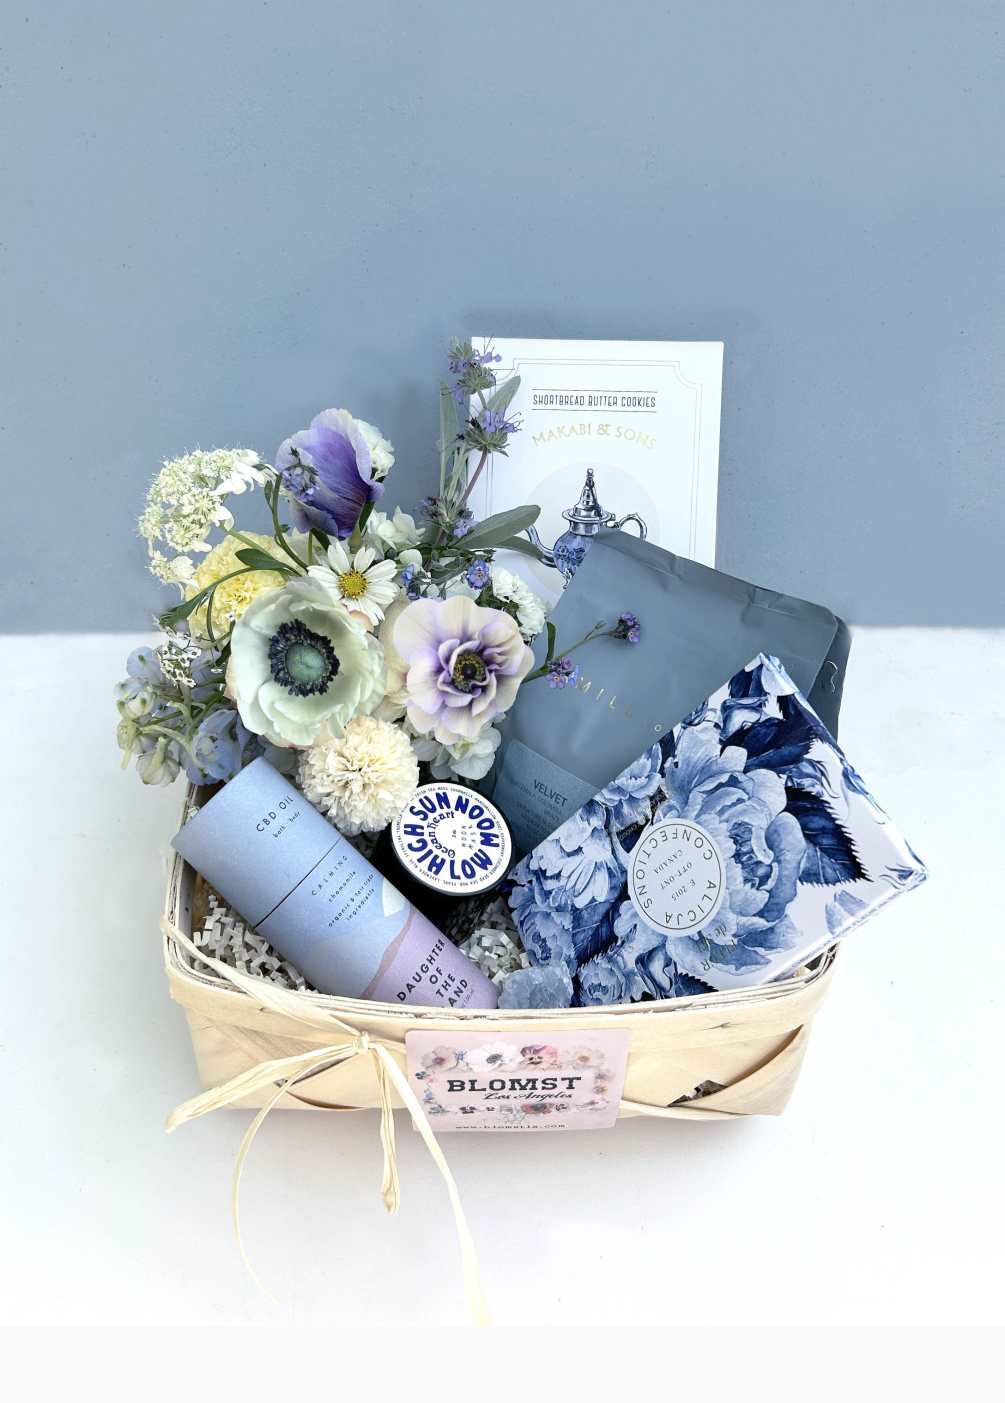 Gorgeous romantic basket full of blue colored, healthy treats, sweets and gifts.